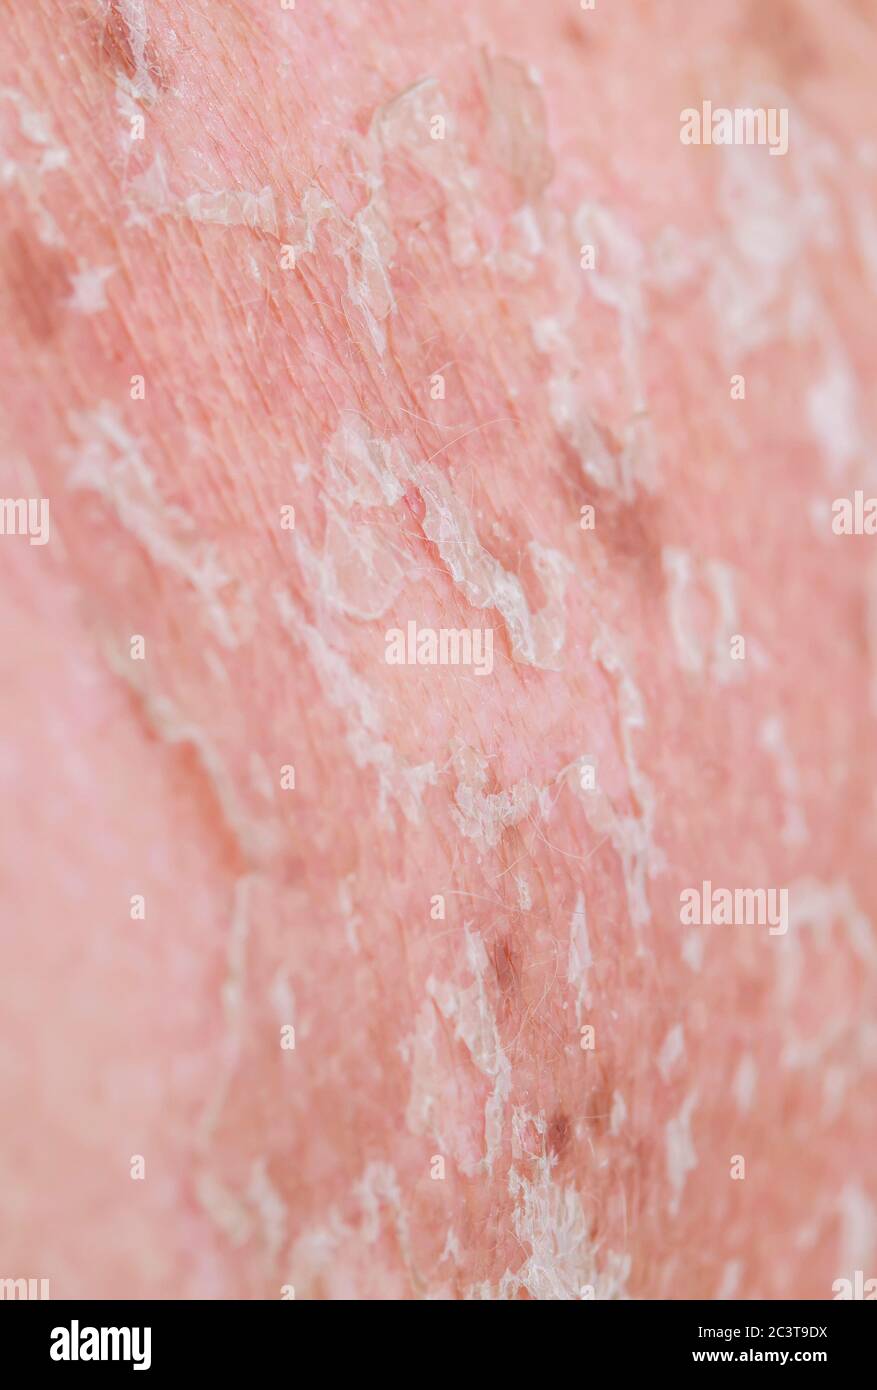 texture of irritated unhealthy skin with scales of dead cells and redness after sunburn and allergies leave the body Stock Photo